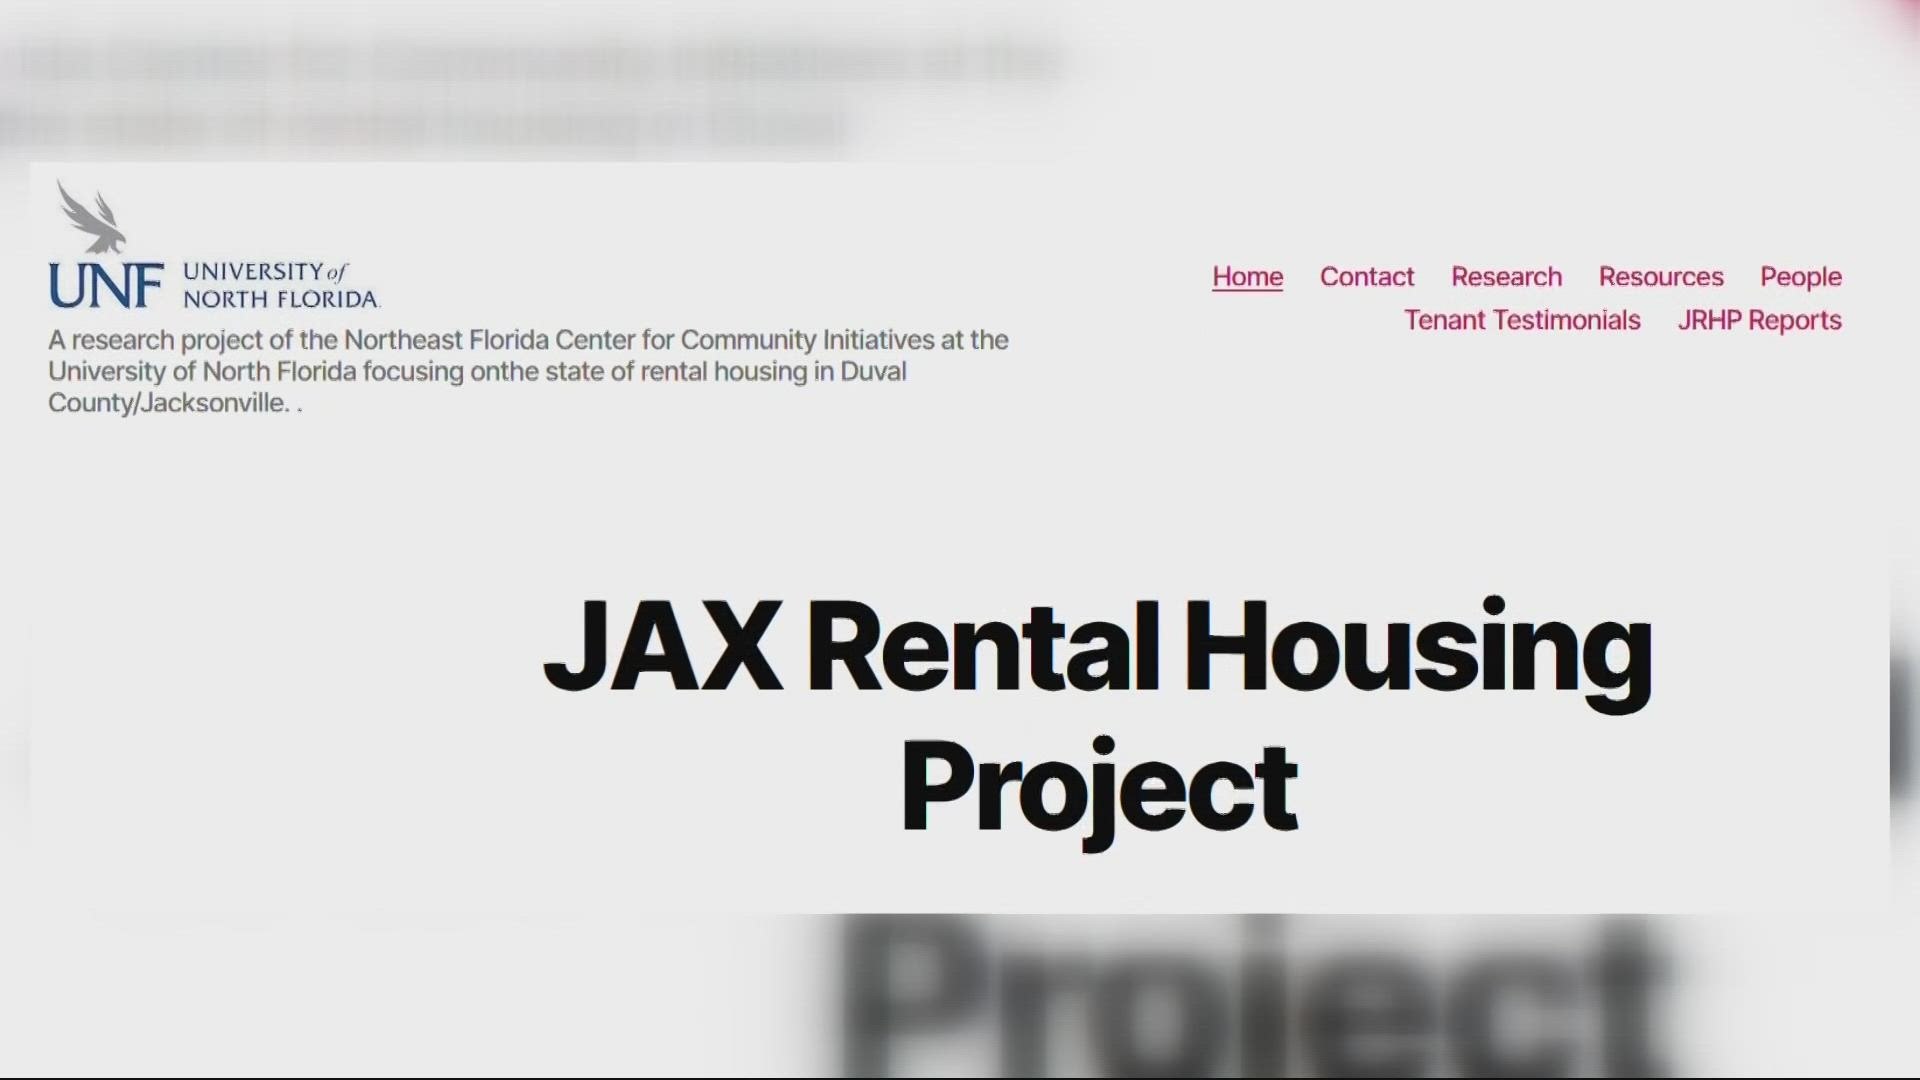 Average rent prices have increased by 39% in Jacksonville in the past two years.